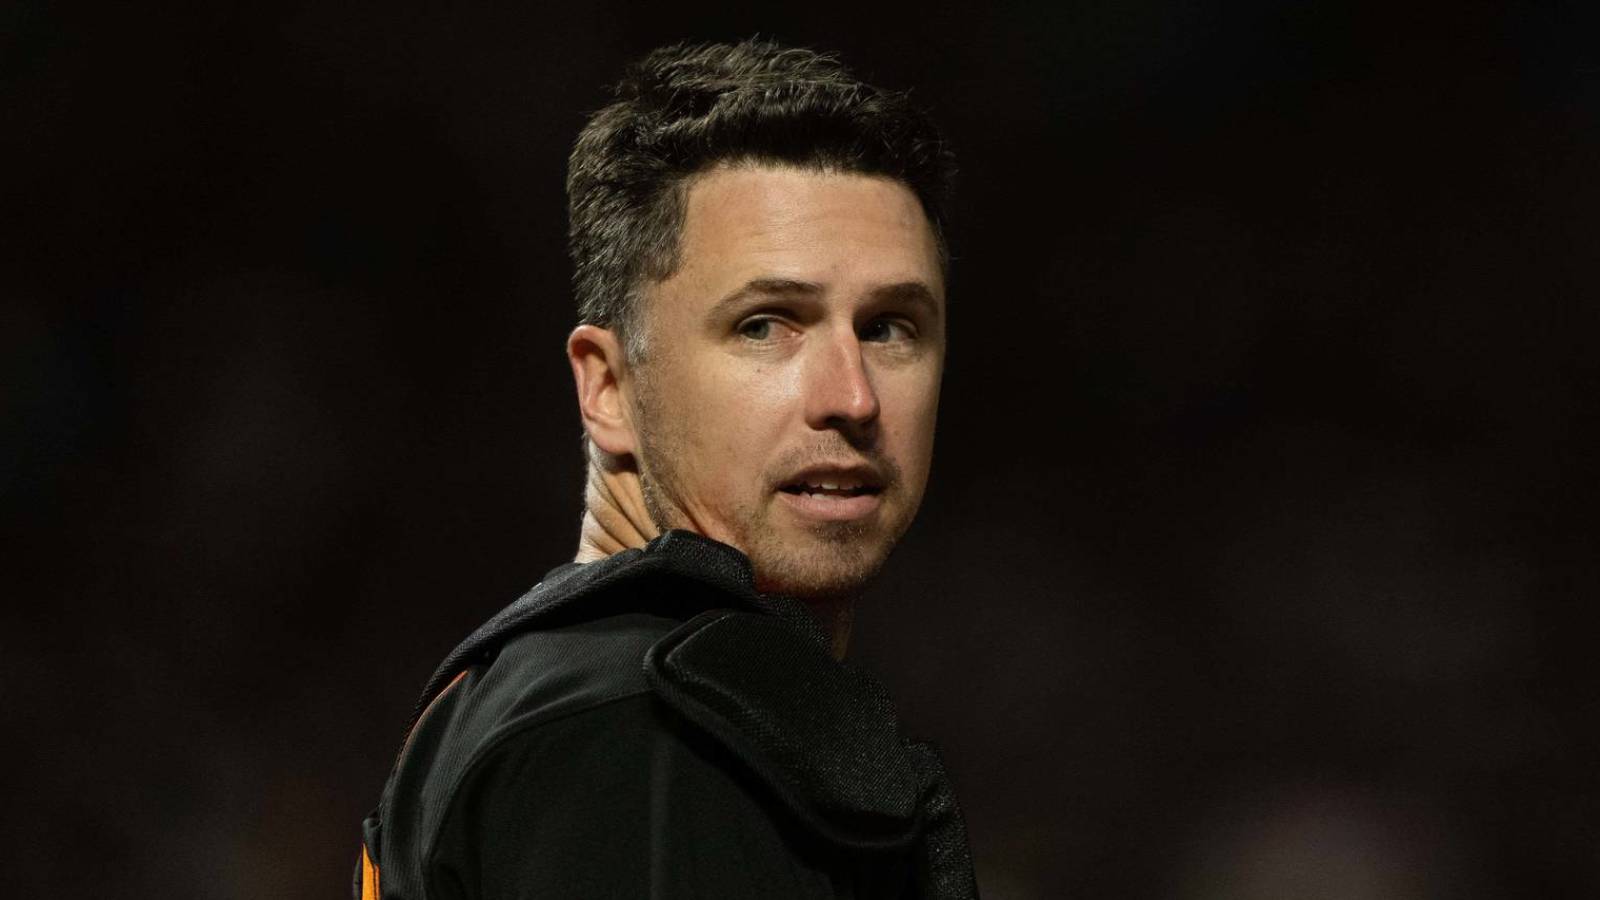 Giants catcher Buster Posey set to retire after 12 seasons